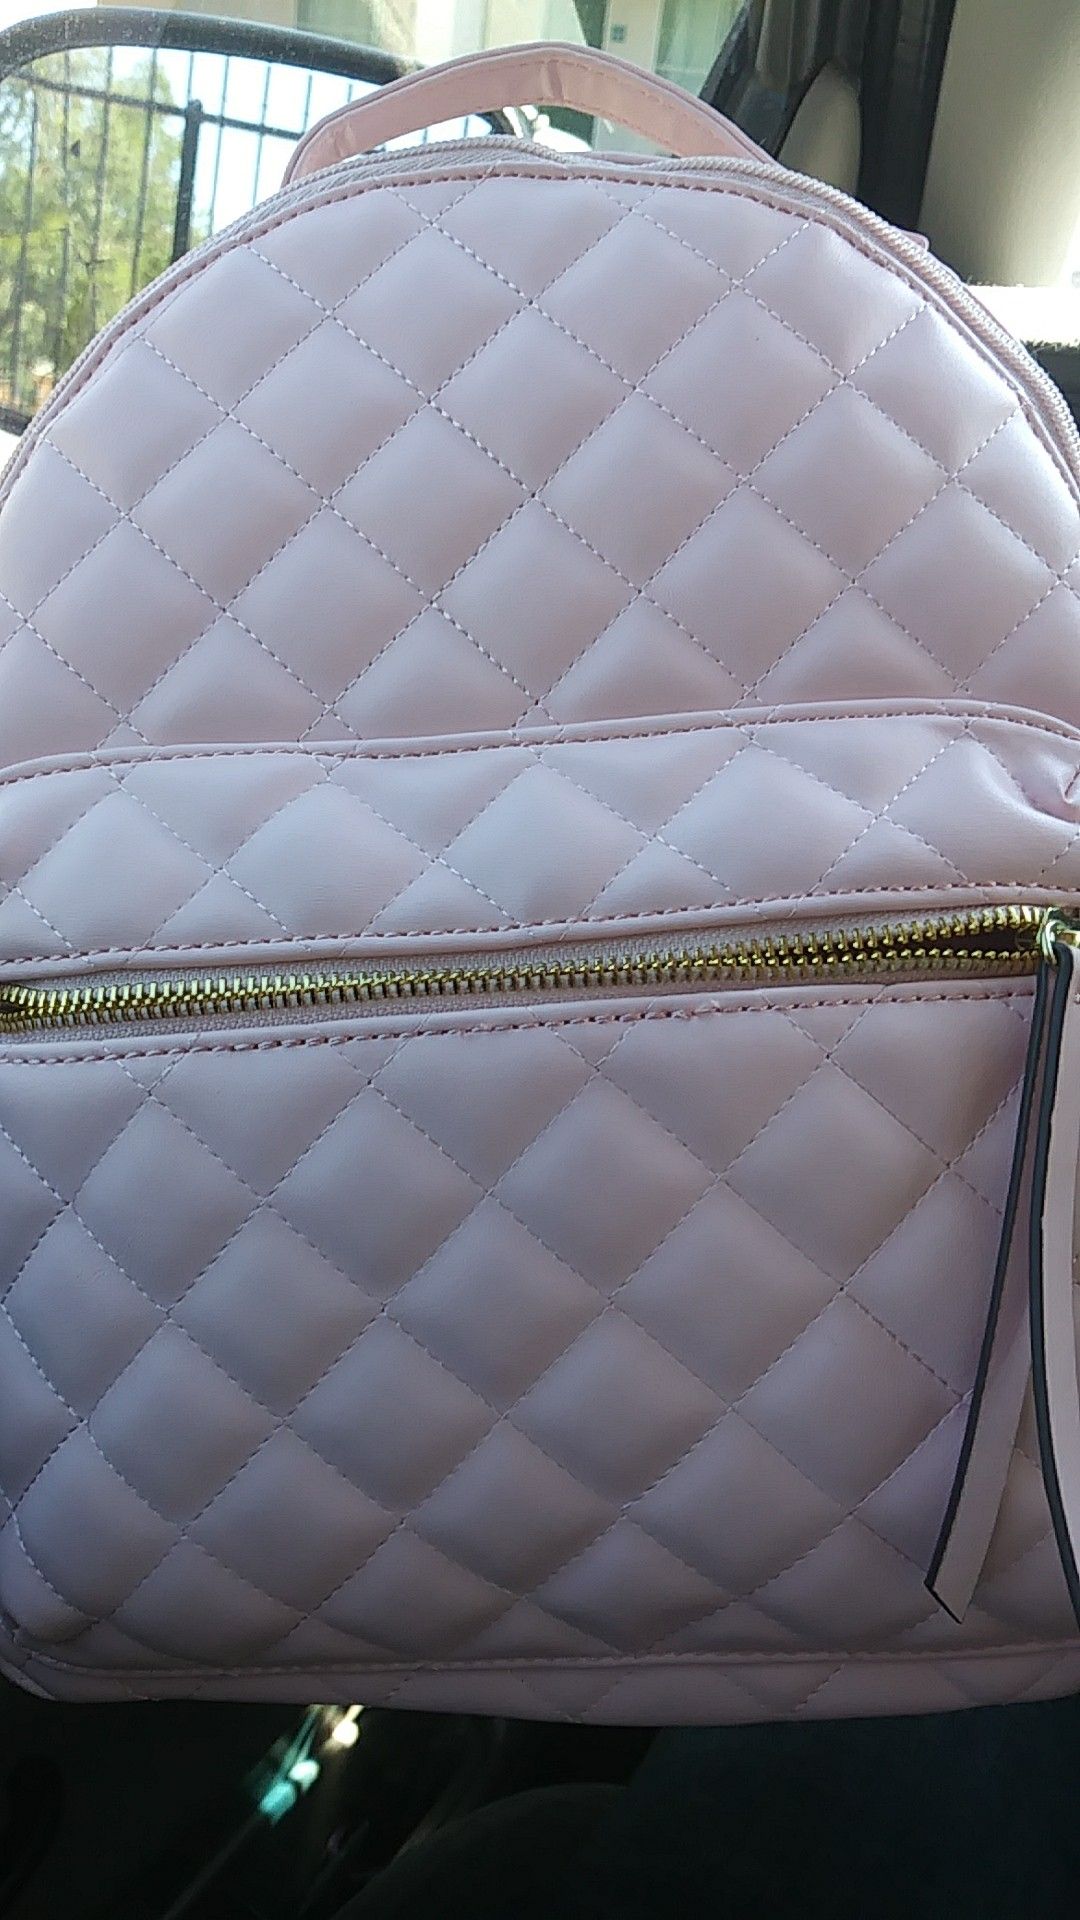 Liz claiborne. Pink leather womens backpack